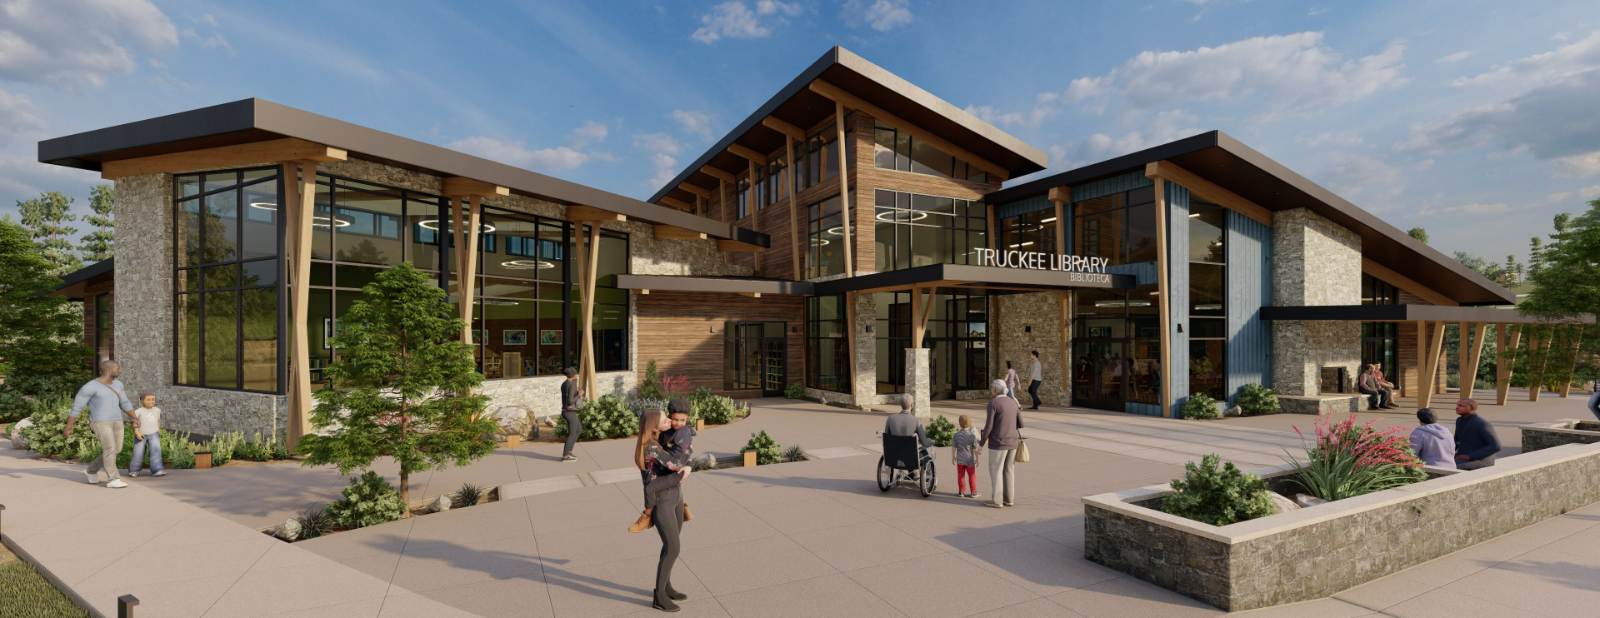 Plans for a New Truckee Library Have Come to Life